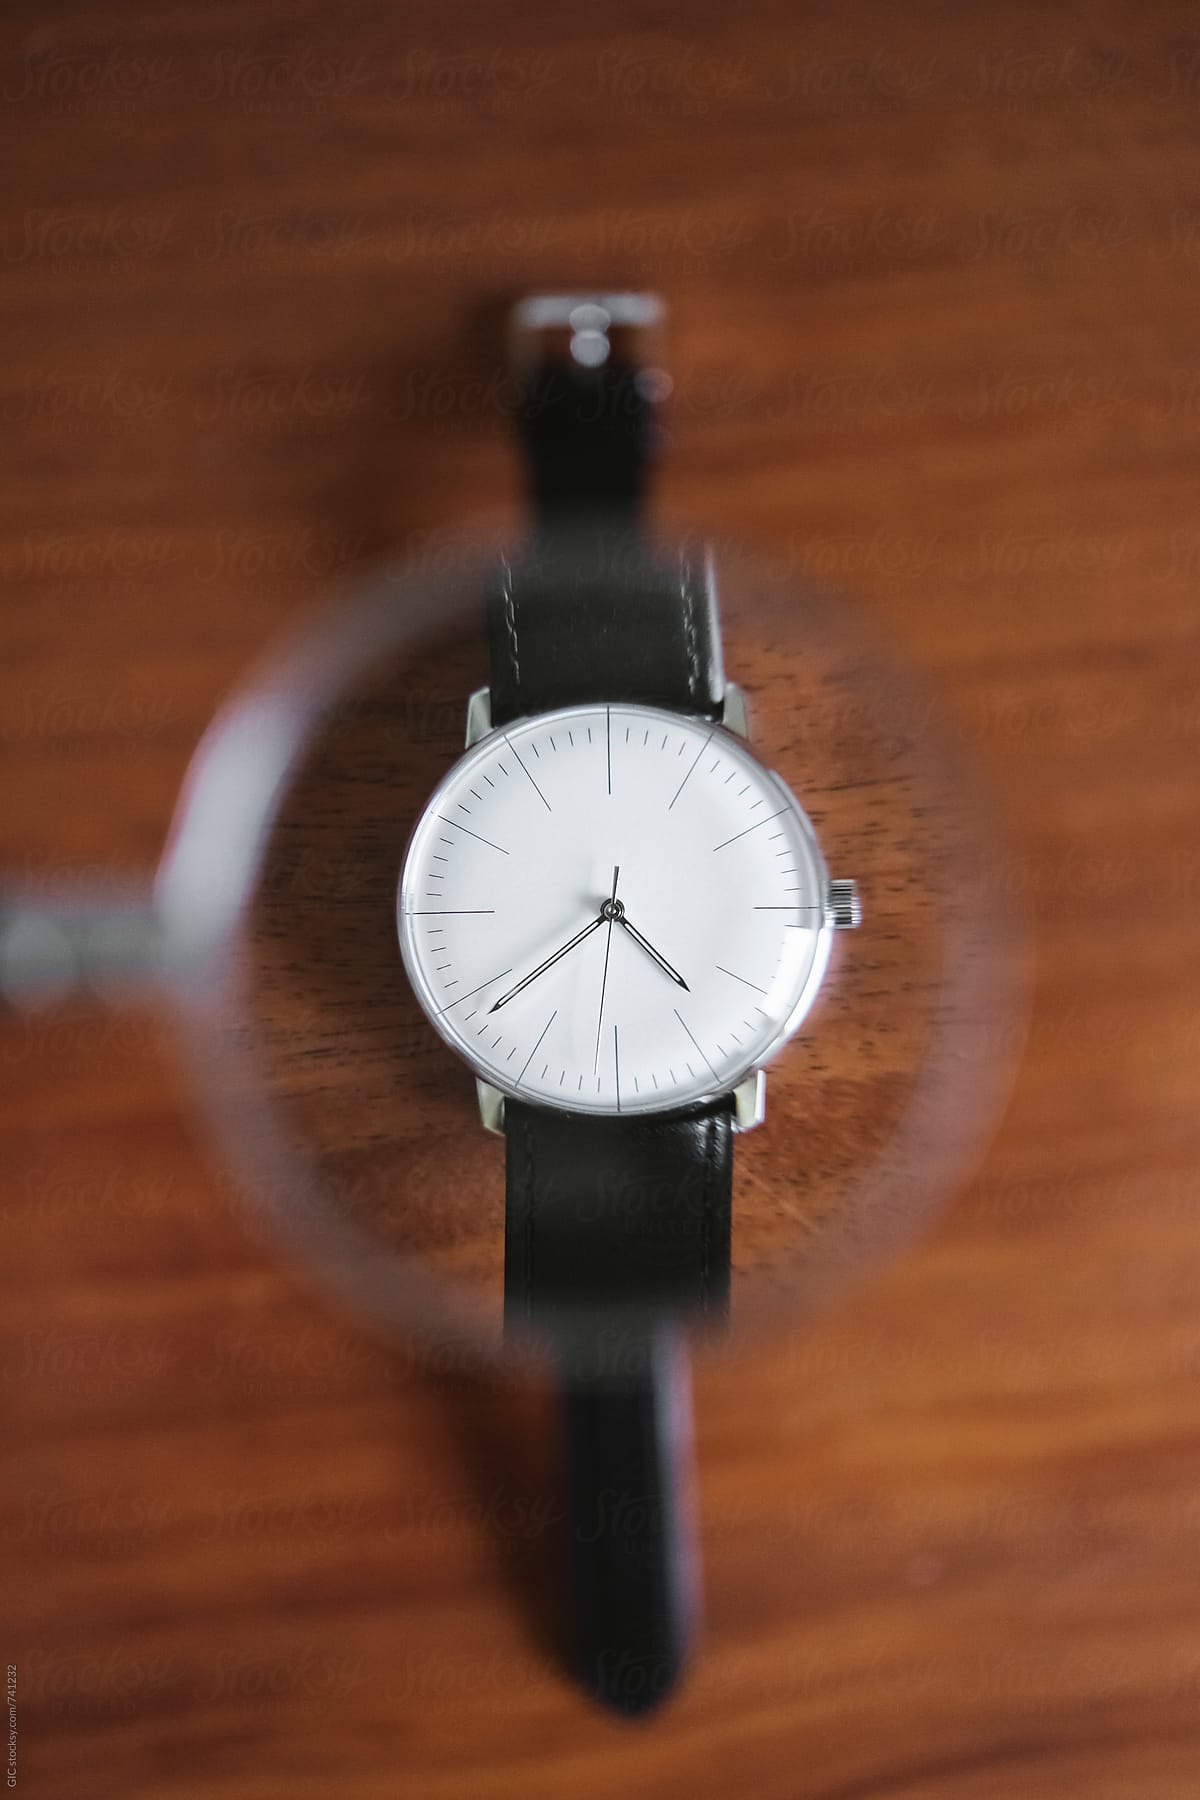 Magnifying lens on a vintage watch